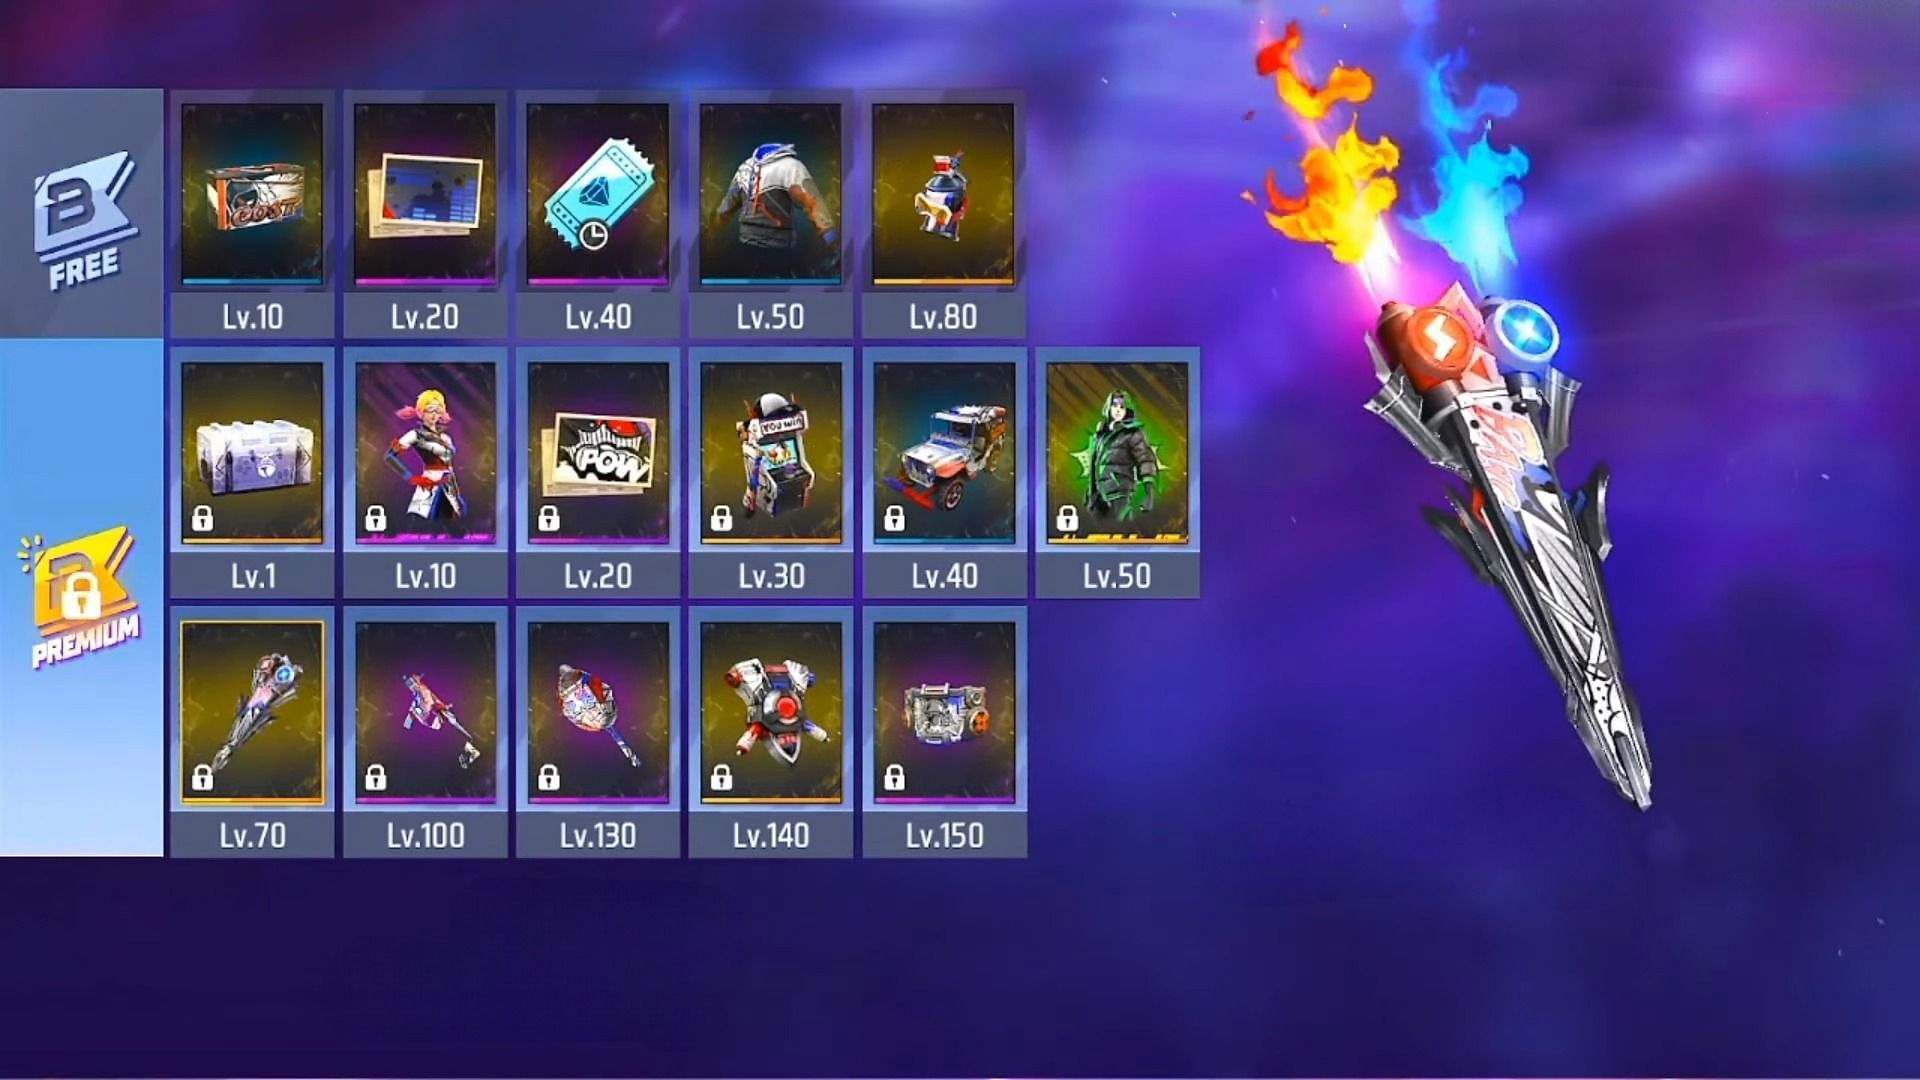 Rewards of the Free Fire Booyah Pass Season 6 has been leaked (Image via Garena)